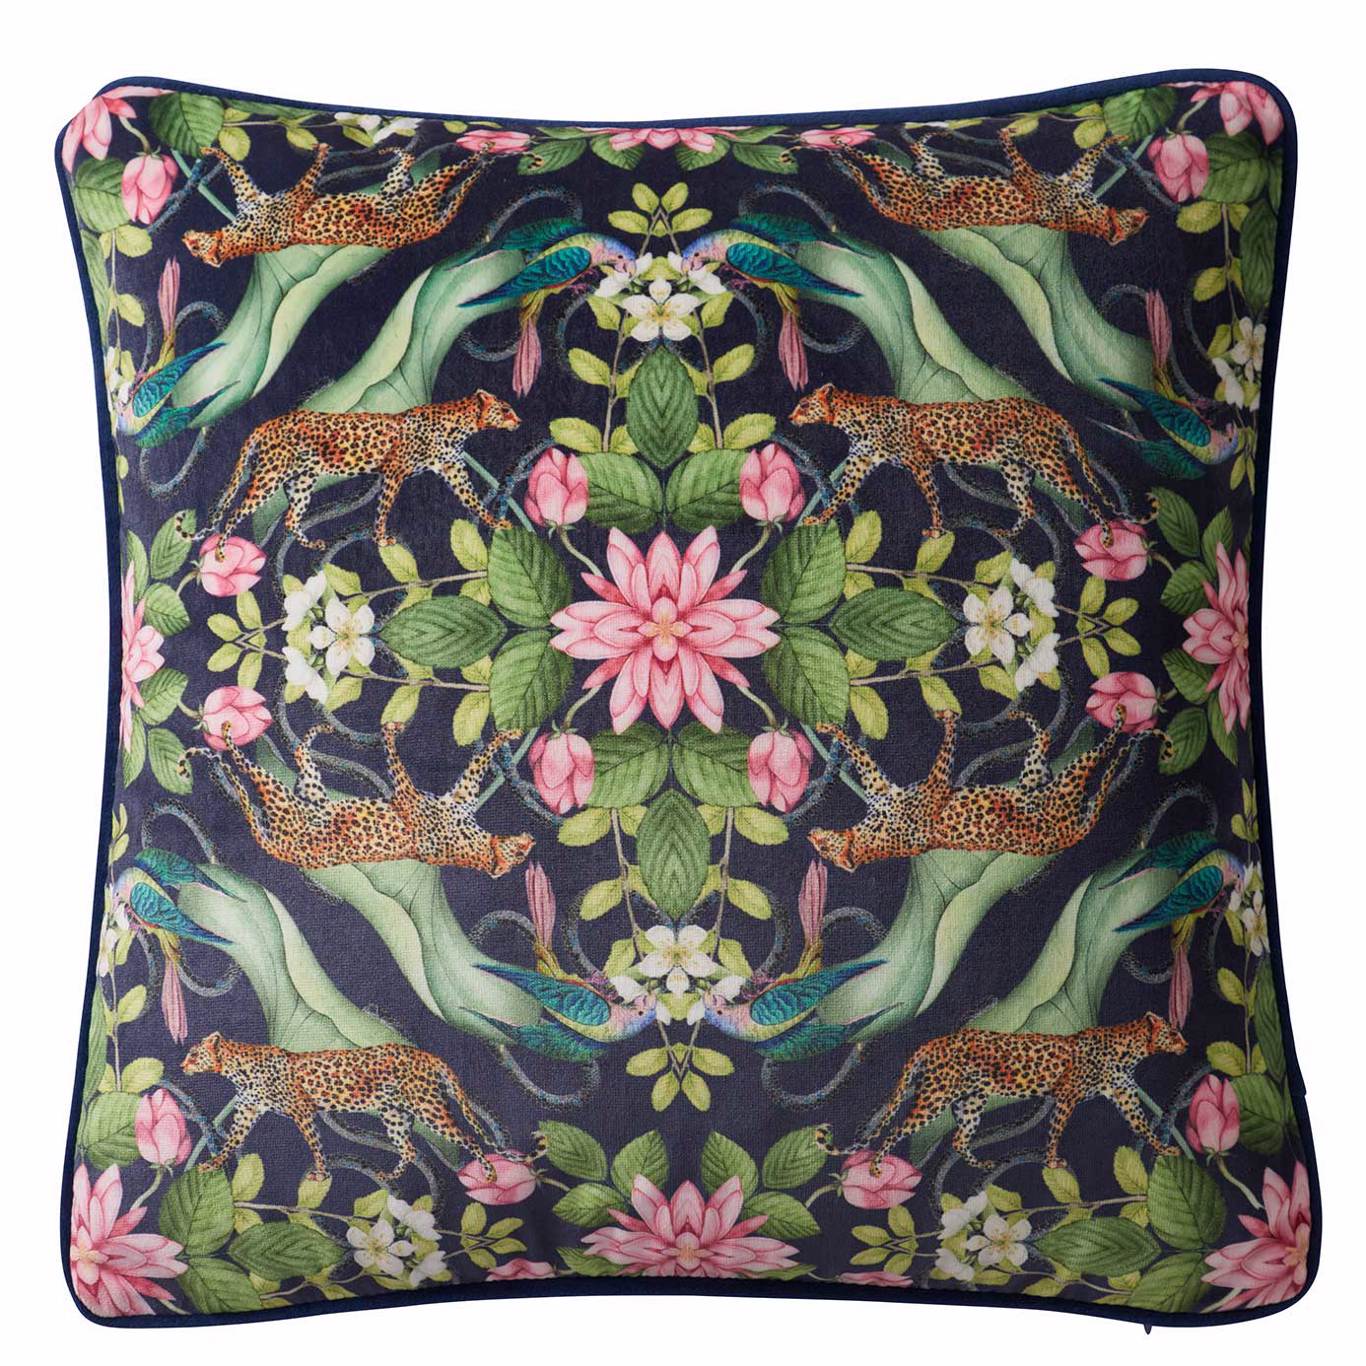 Menagerie Cushion Midnight Bedding by WED